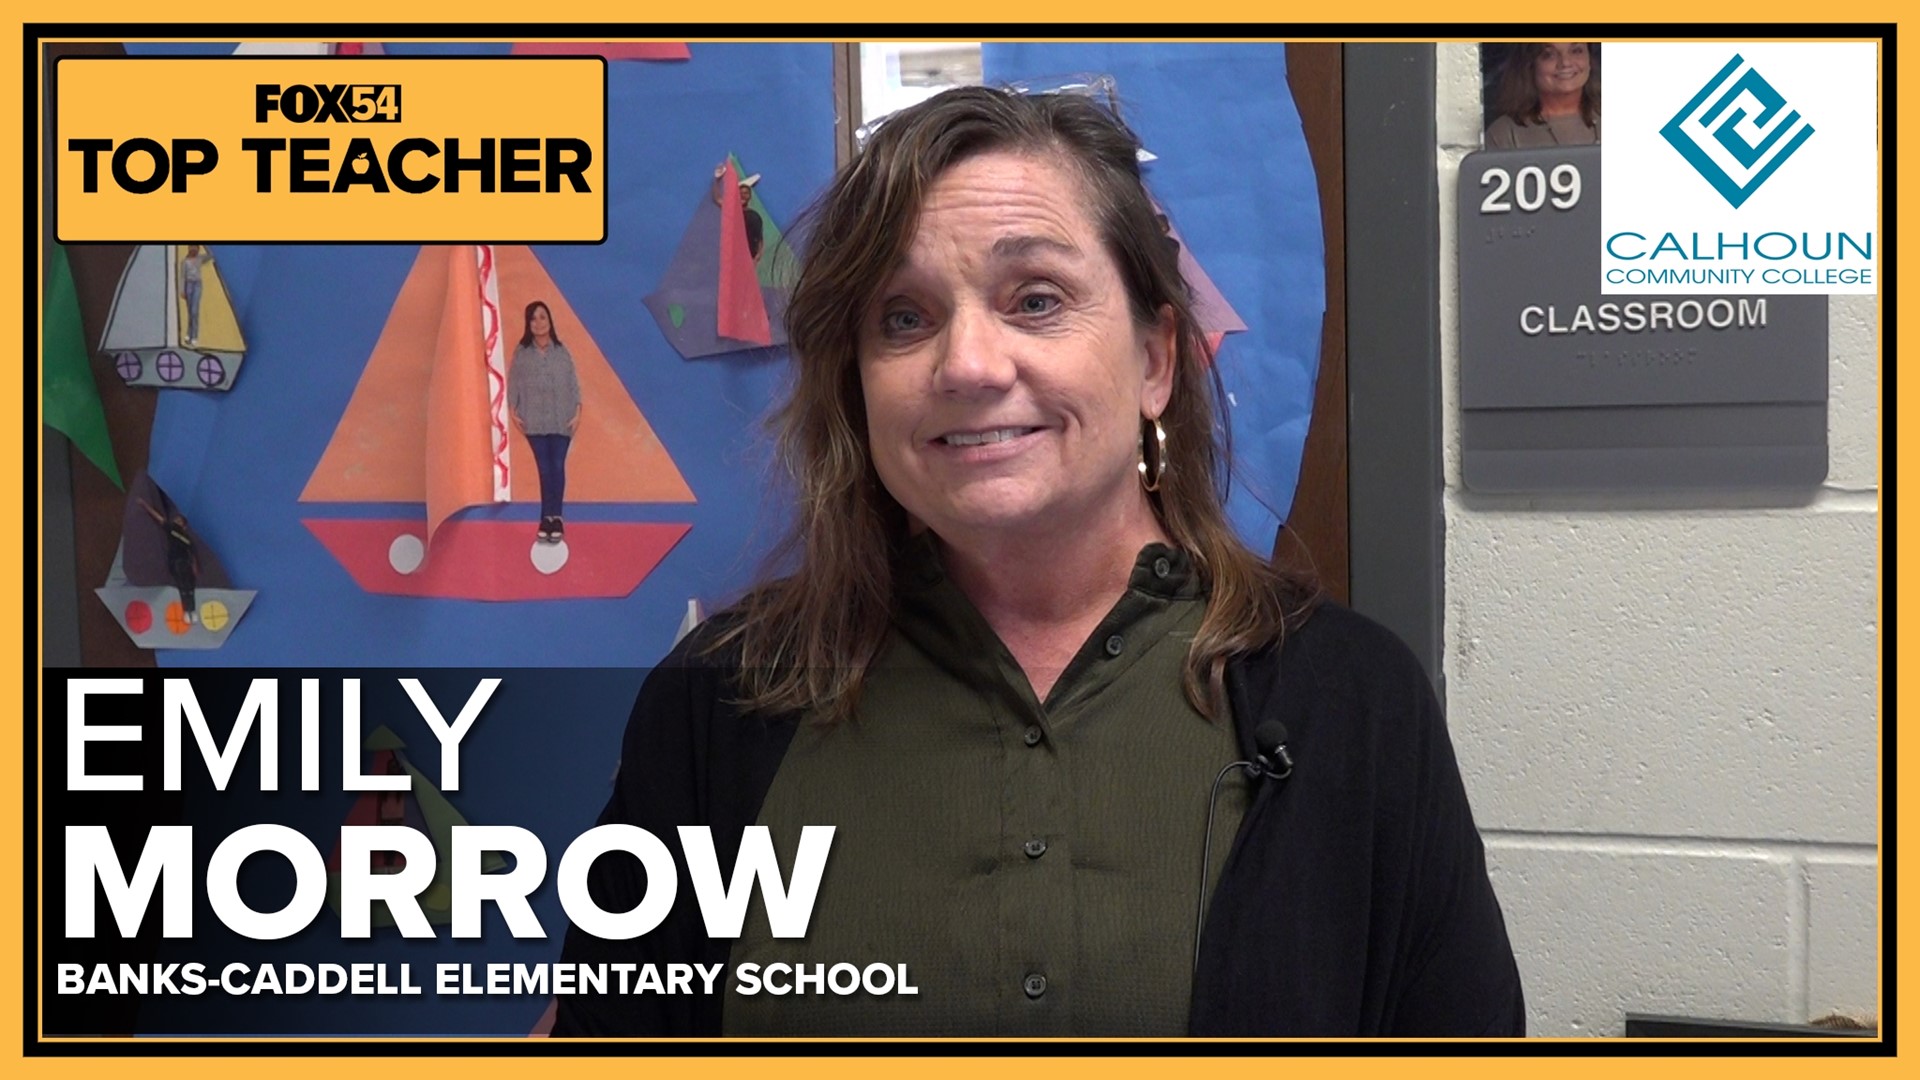 Emily Morrow is surprised as FOX54's Top Teacher. She's retiring after serving 32 years. Congratulations!